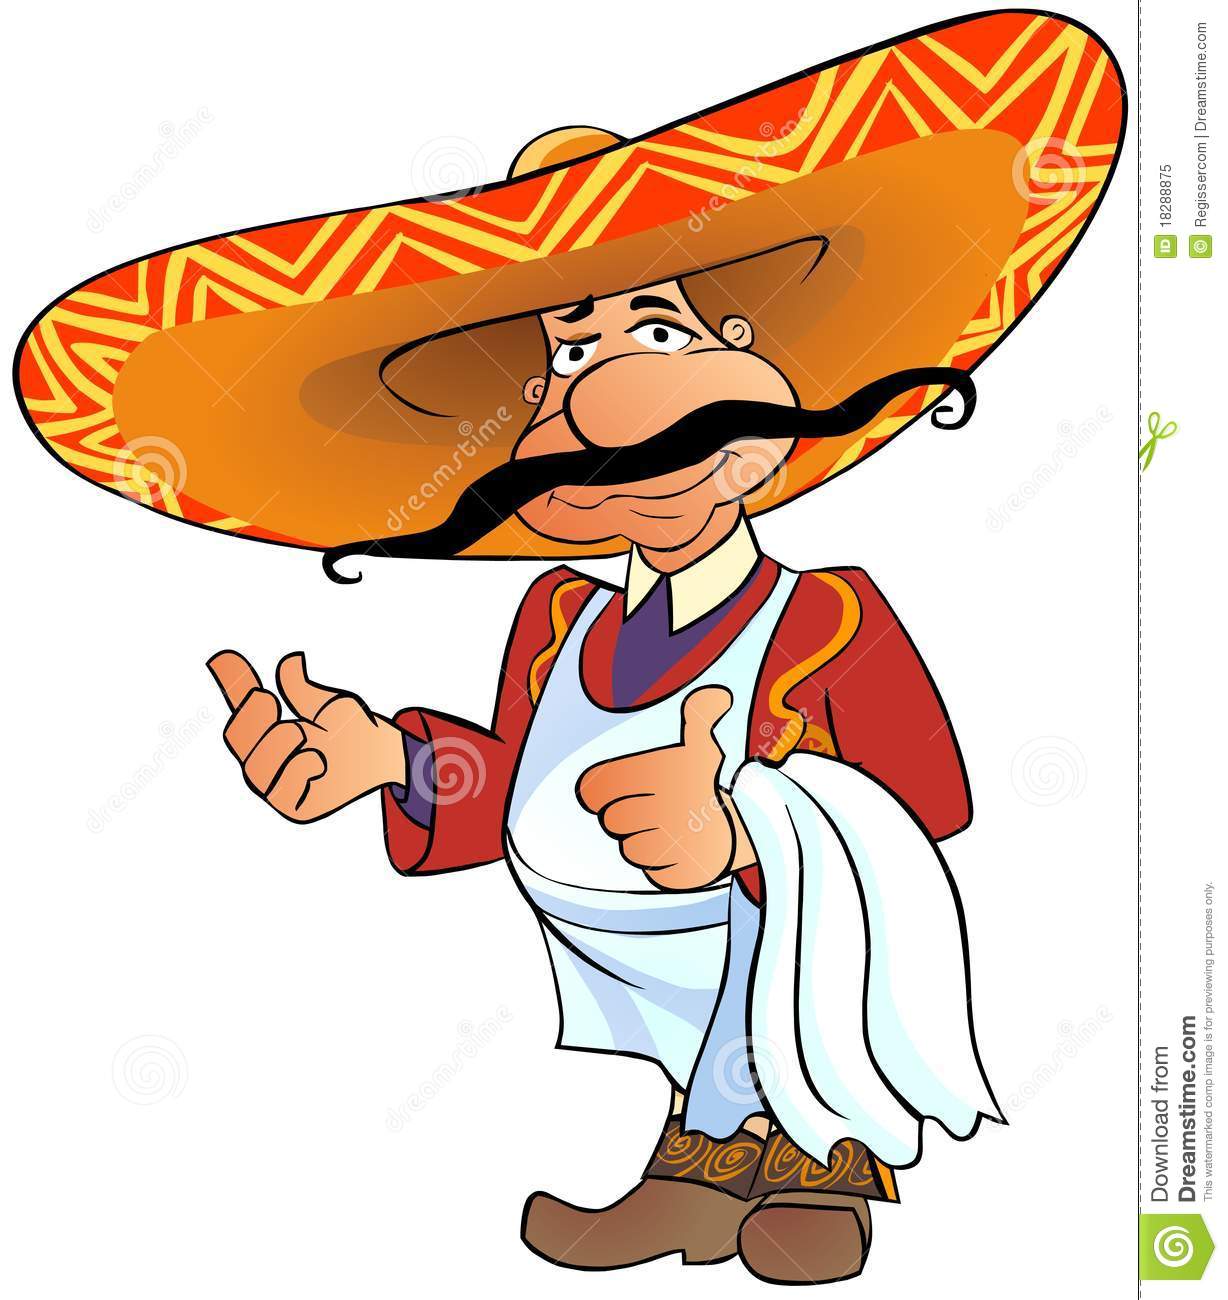 Mexican Chef With Thumb Up  Royalty Free Stock Photo   Image  18288875